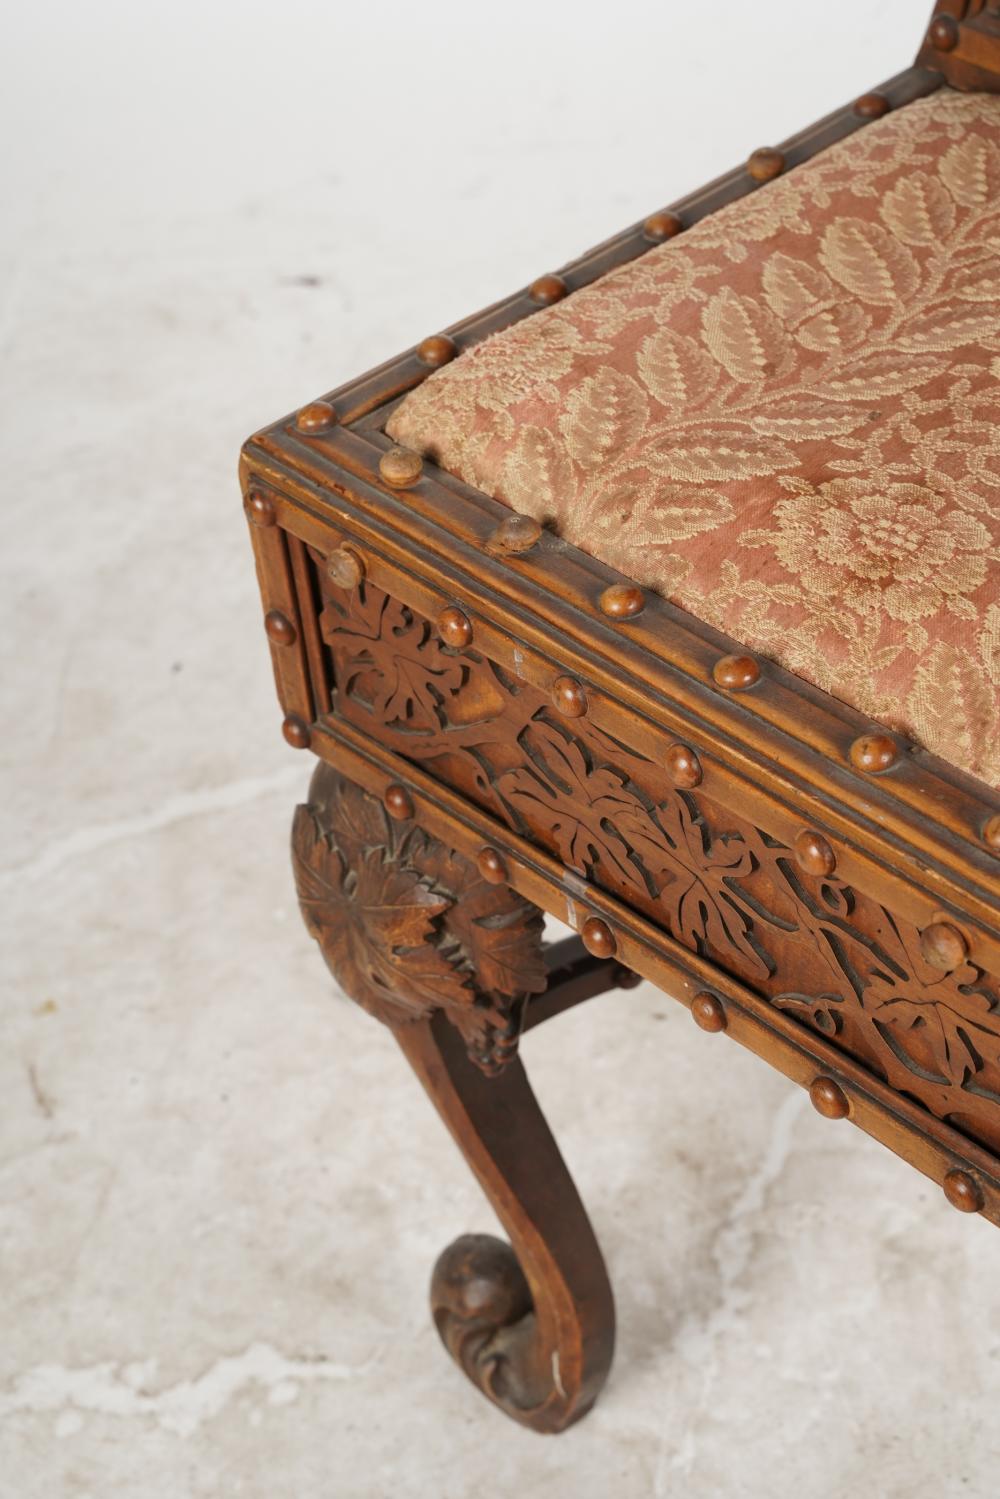 AF2-107: ANTIQUE LATE 19TH CENTURY AMERICAN VICTORIAN HIGHLY CARVED WALNUT SIDE CHAIR